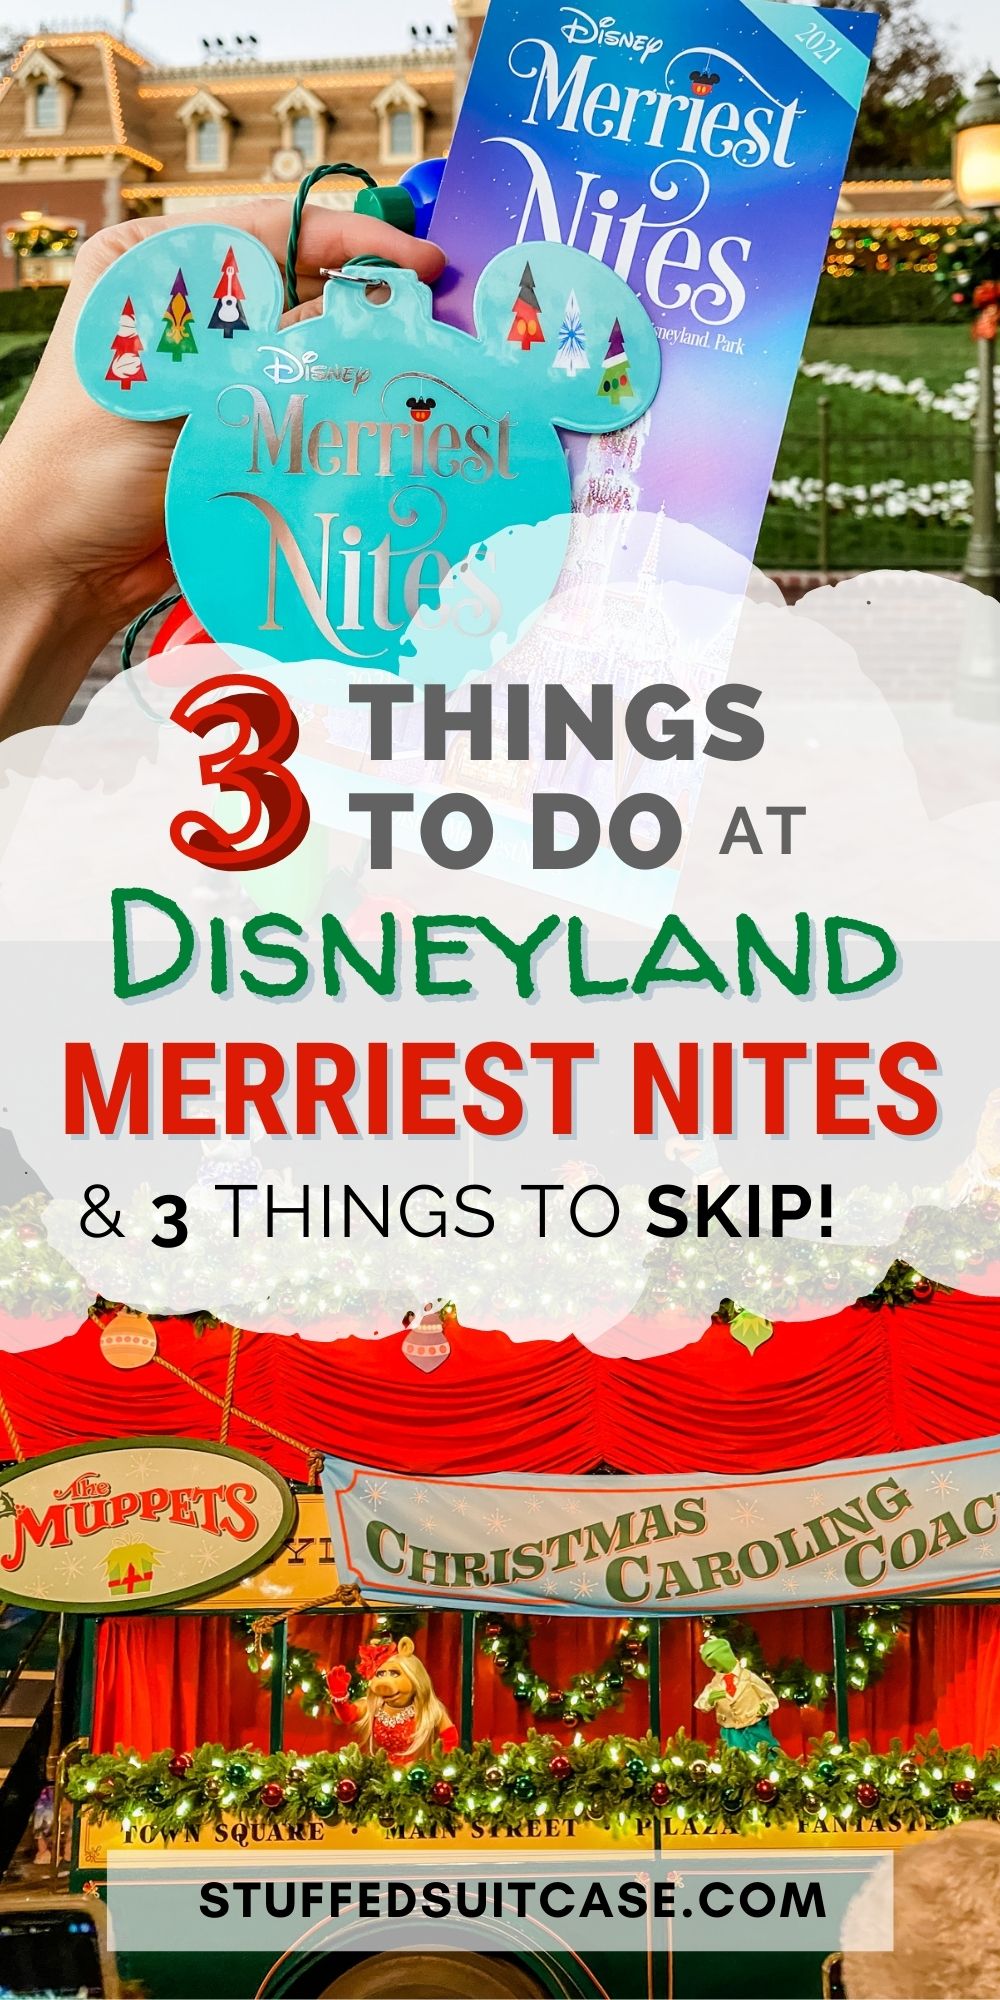 collage for disneyland merriest nites party of text with lanyard and muppets caroling coach photos